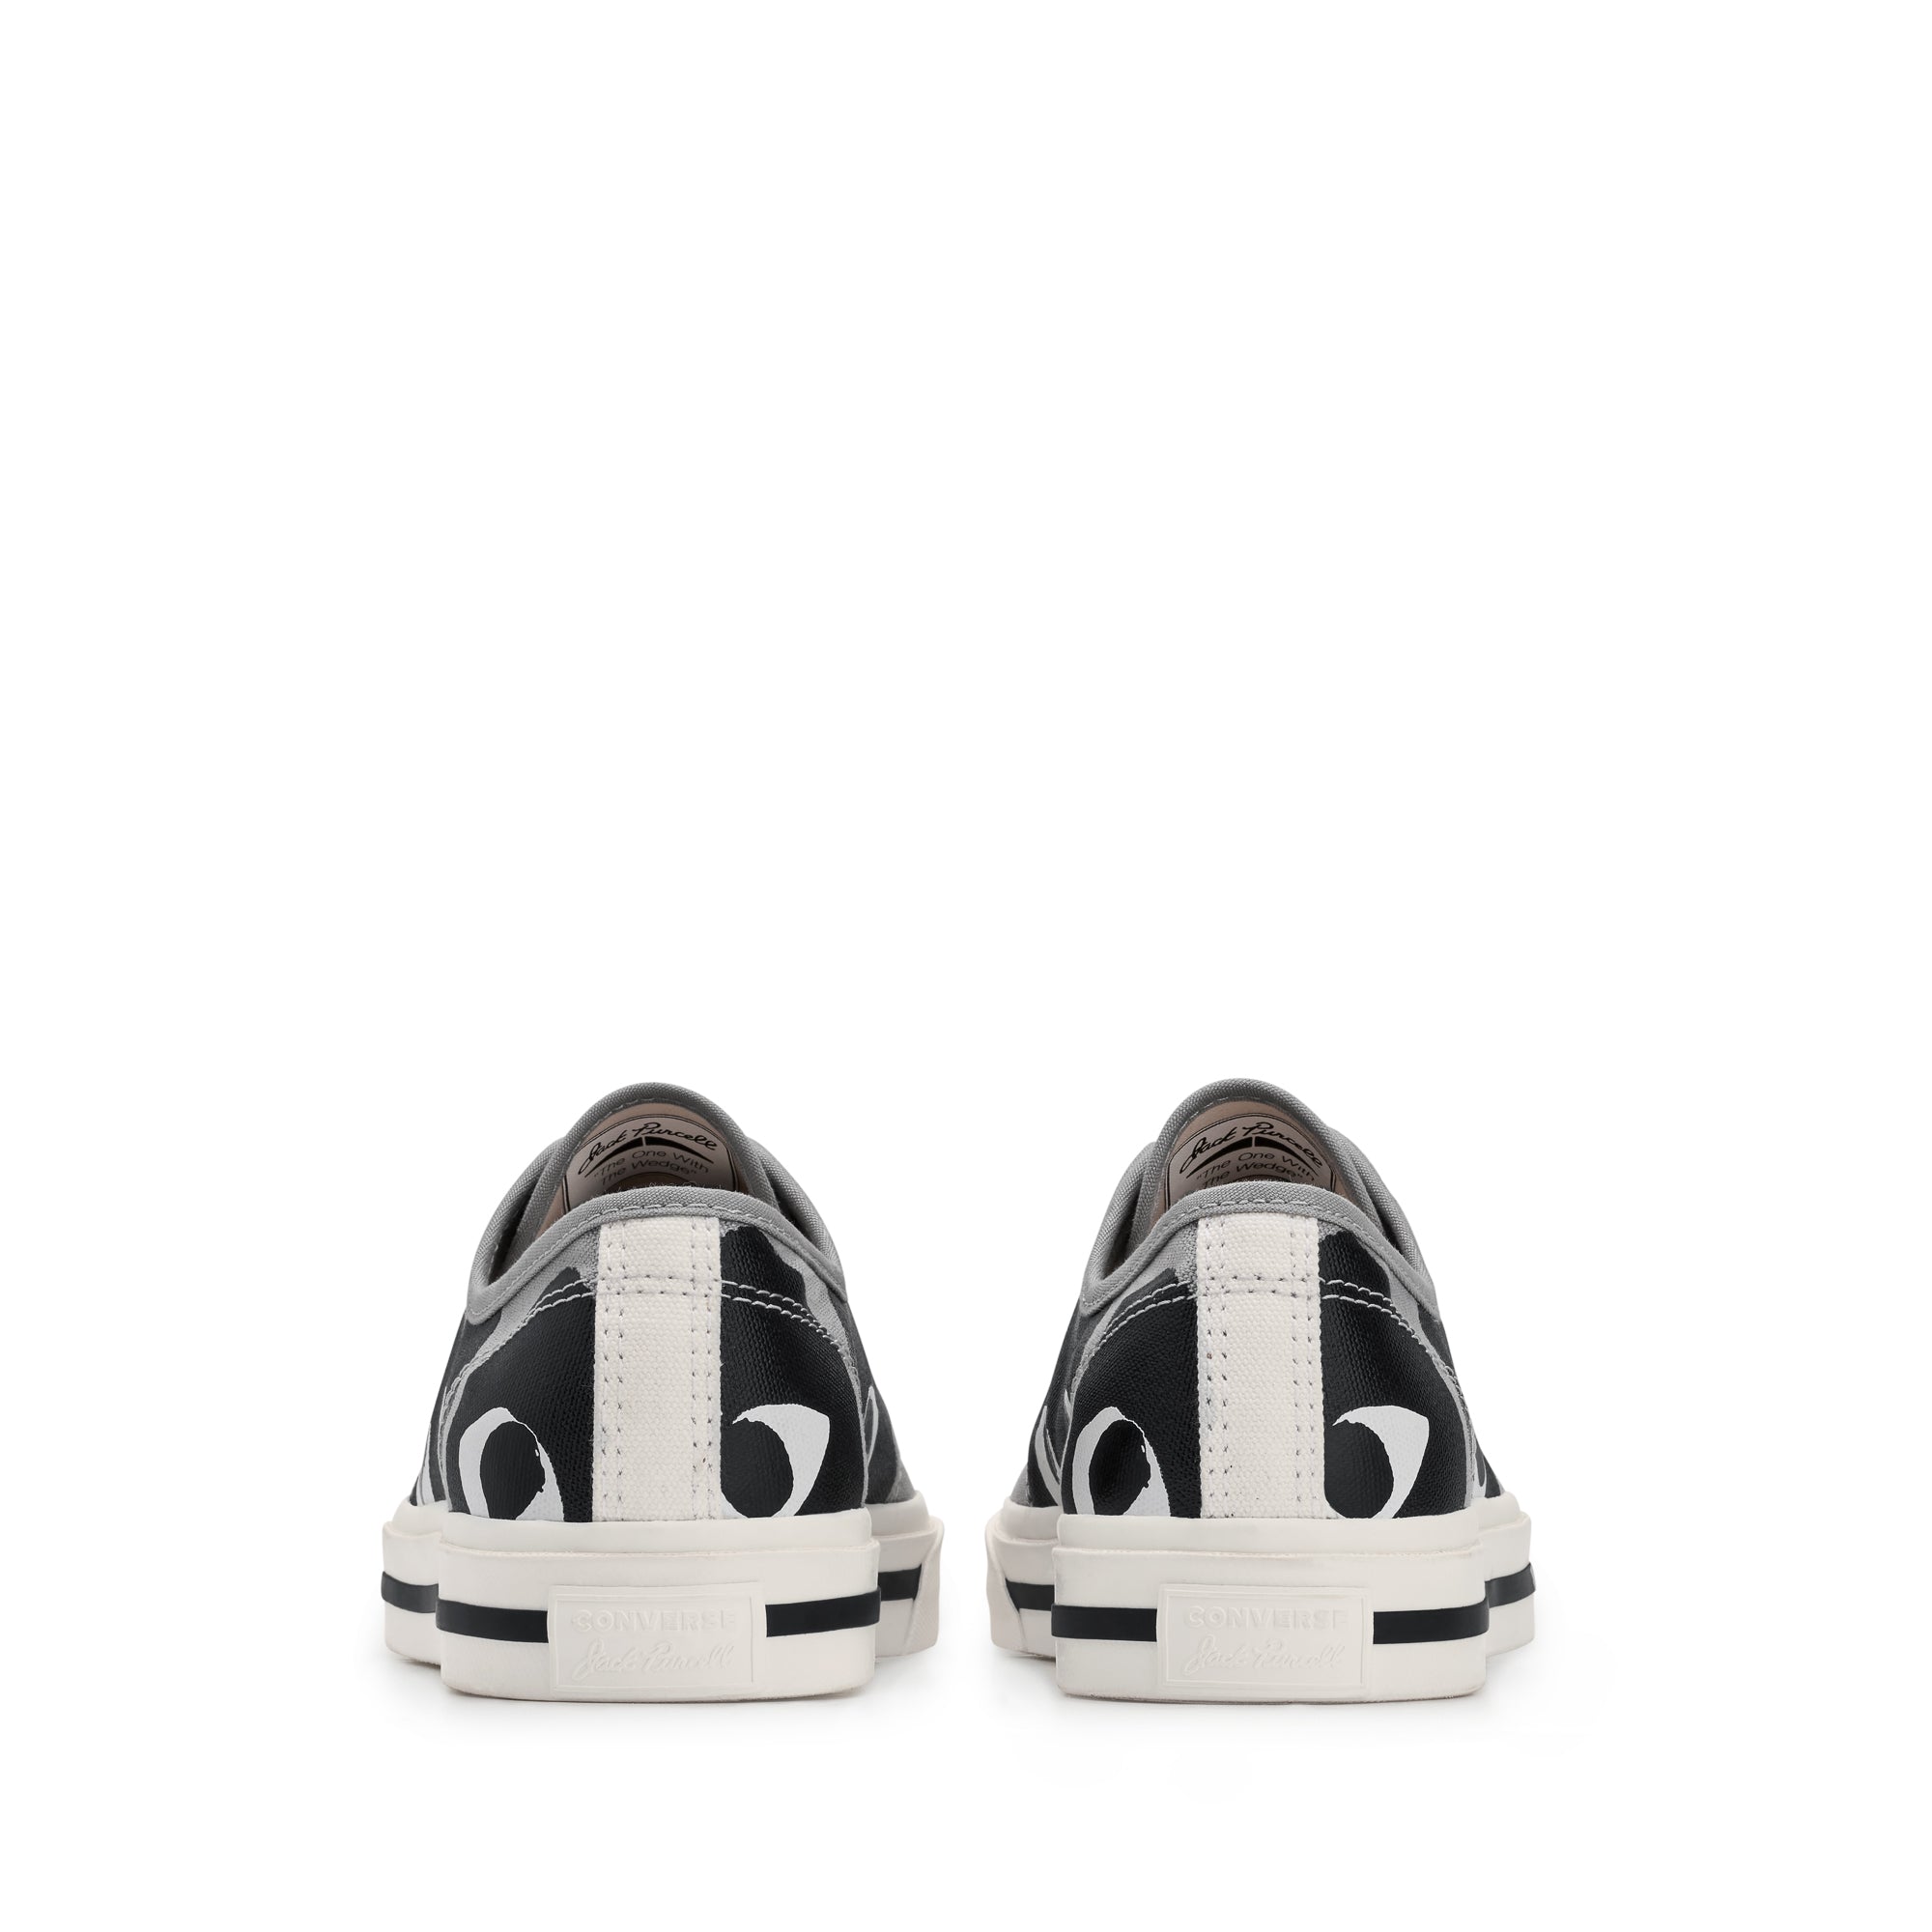 PLAY CONVERSE - Jack Purcell - (Black) view 4